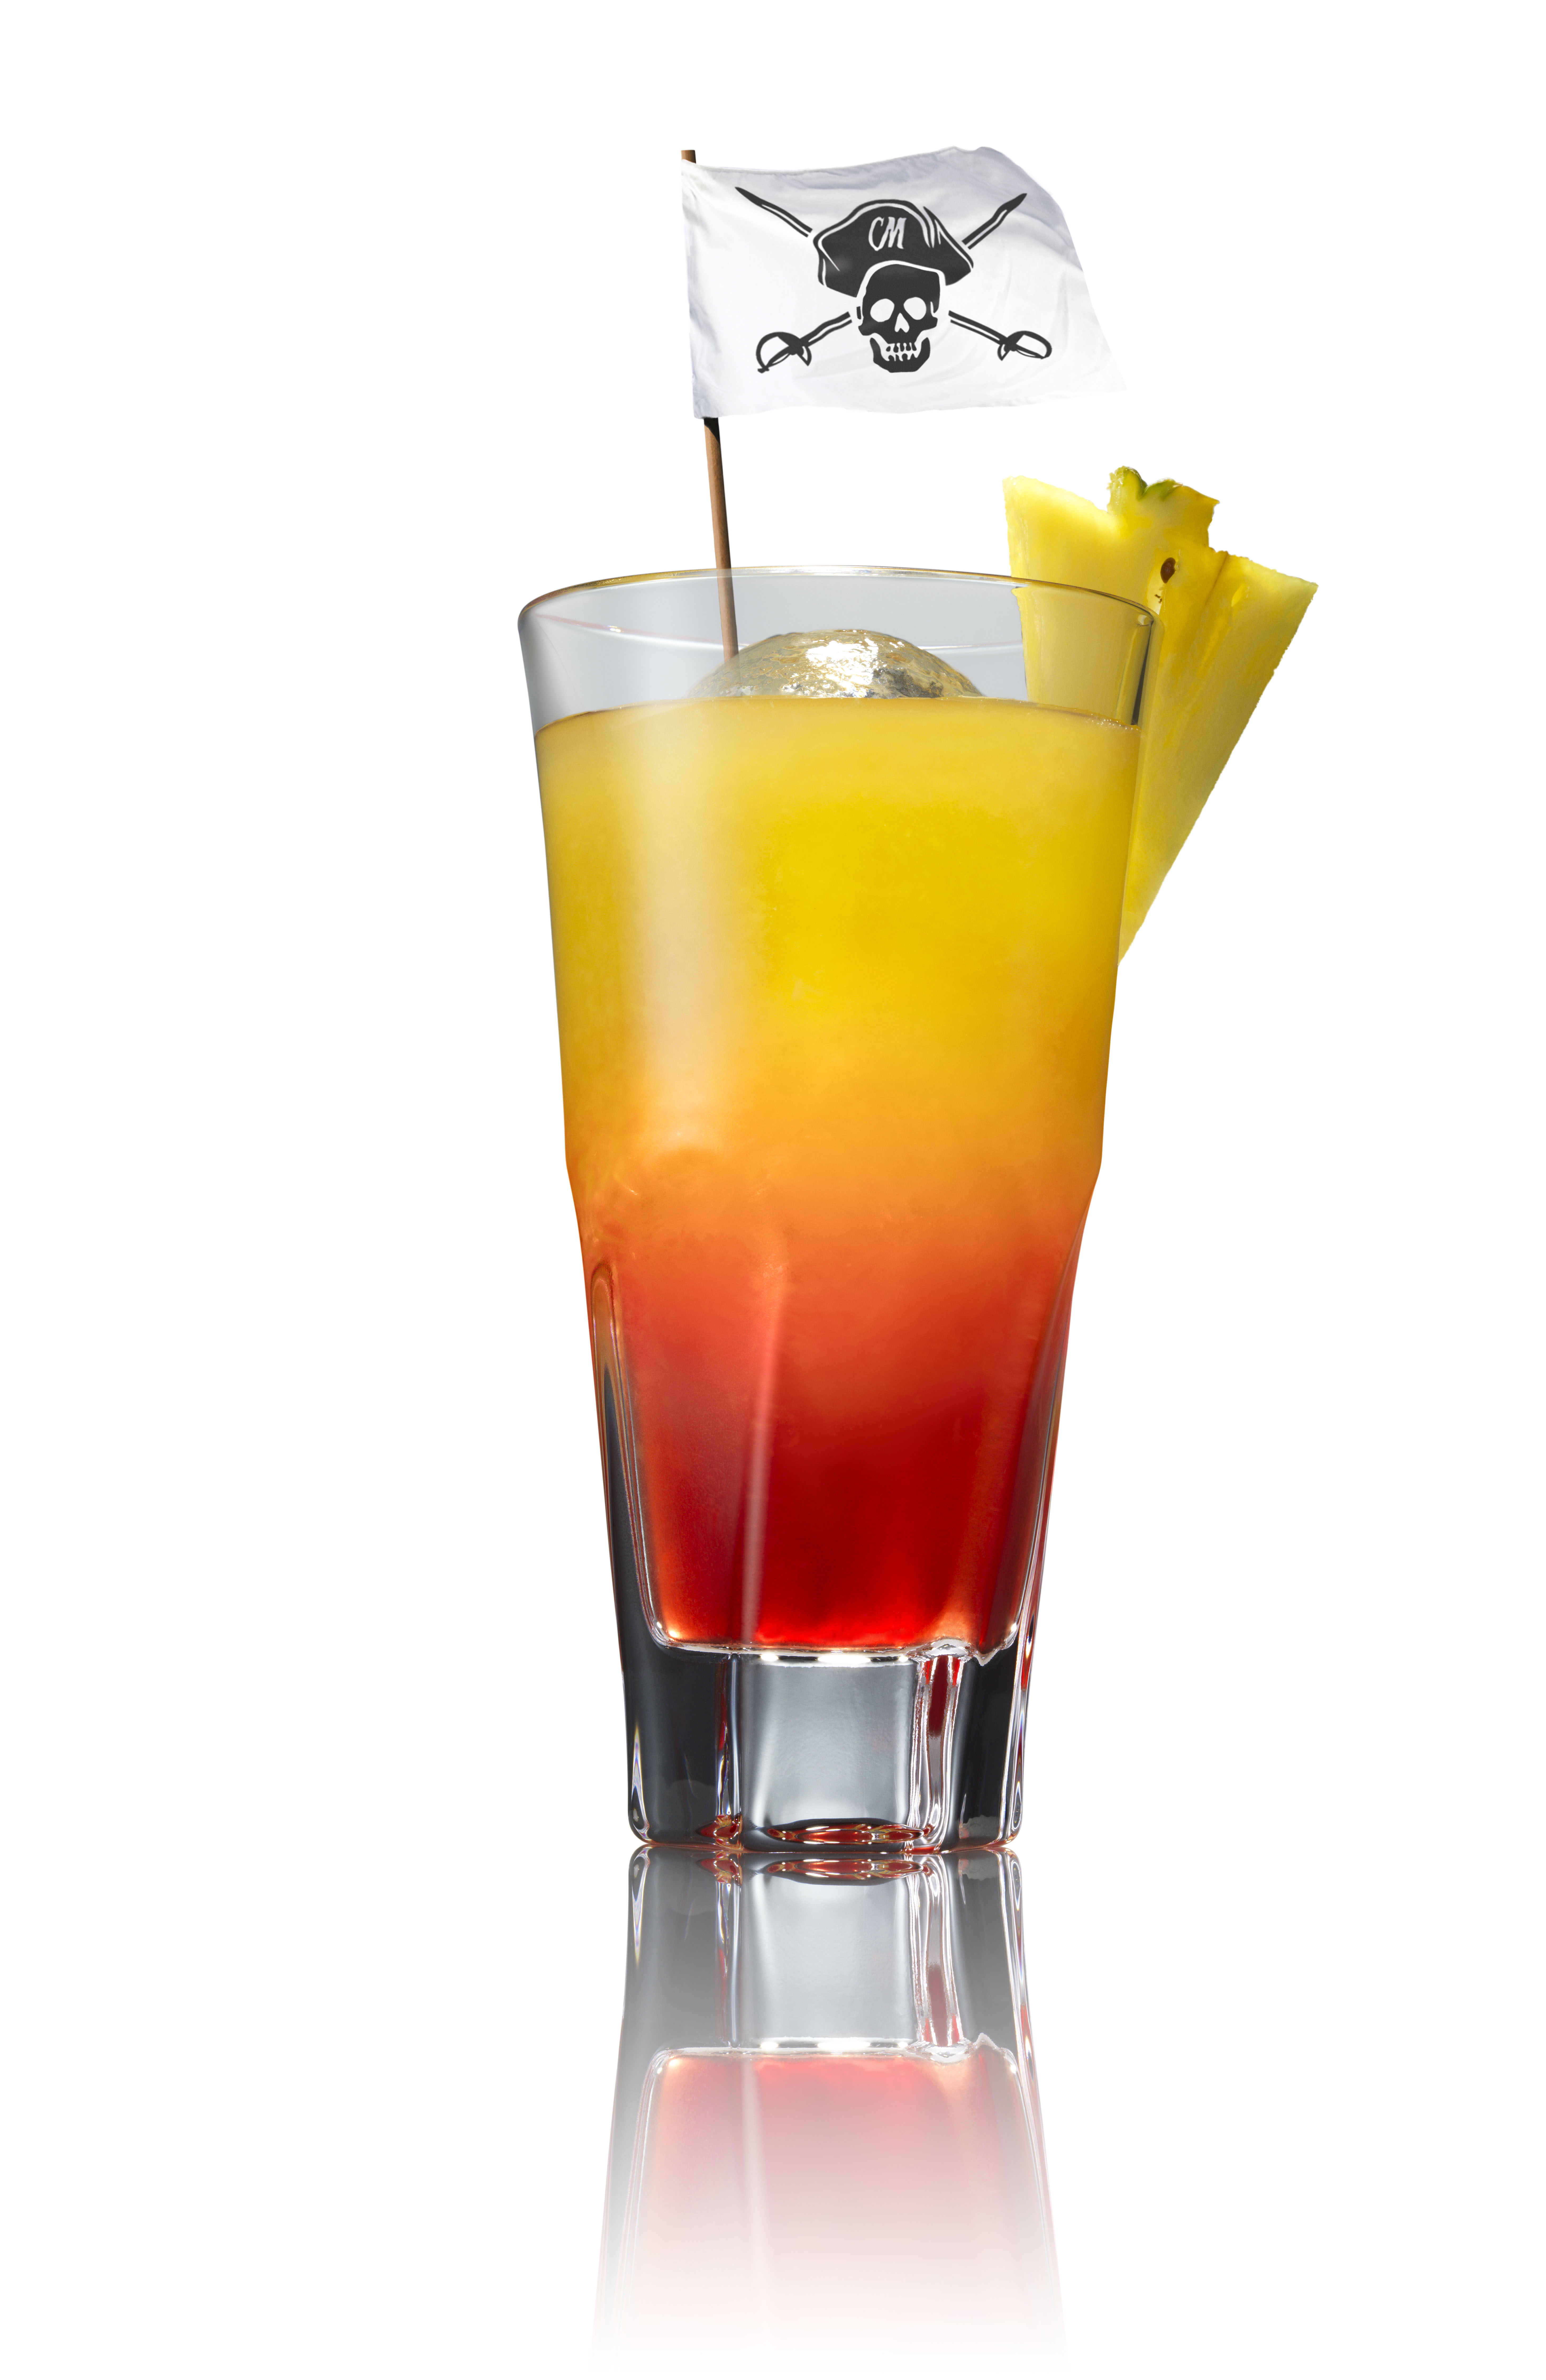 Best Rum Drinks For Summer
 3 Tropical Rum Drinks for the Summer from Captain Morgan